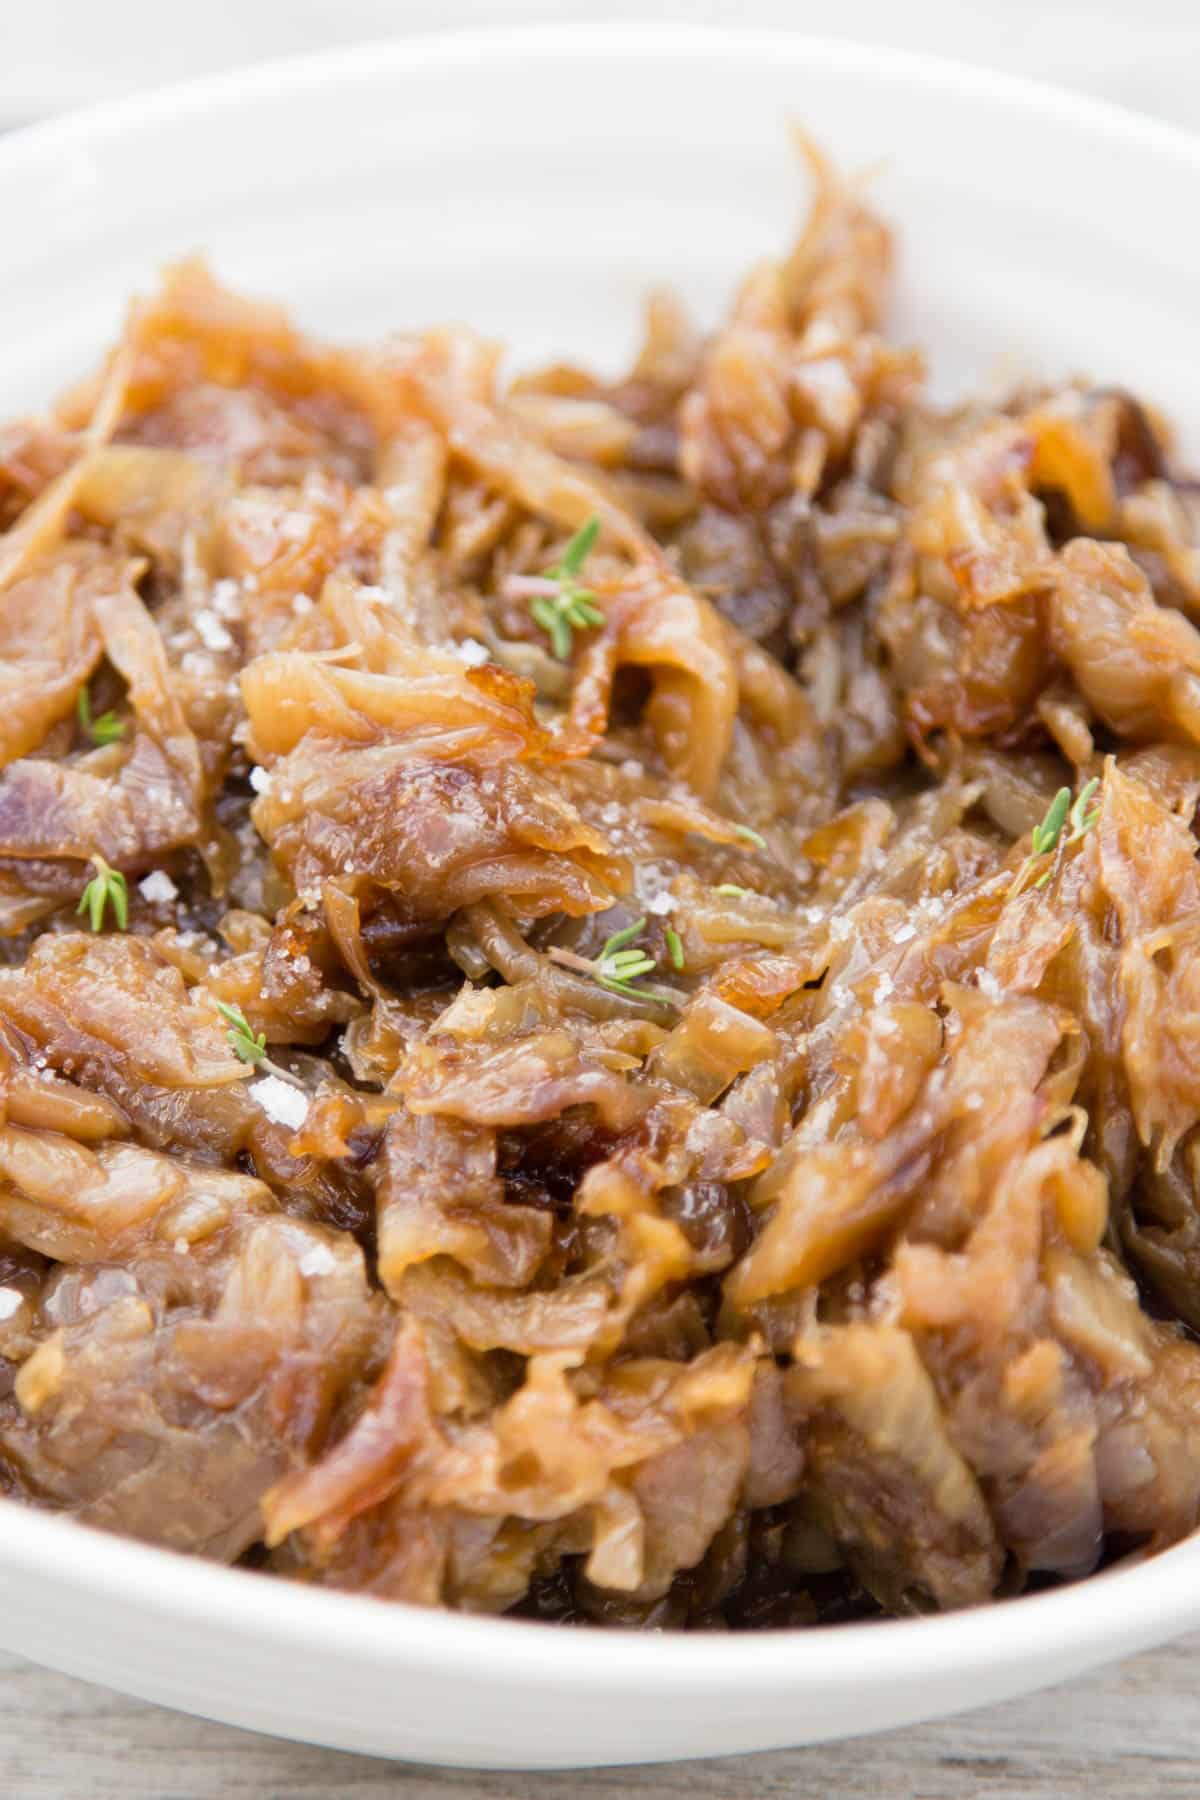 Perfect caramelized onions, rich in colour and caramelized without crisping.